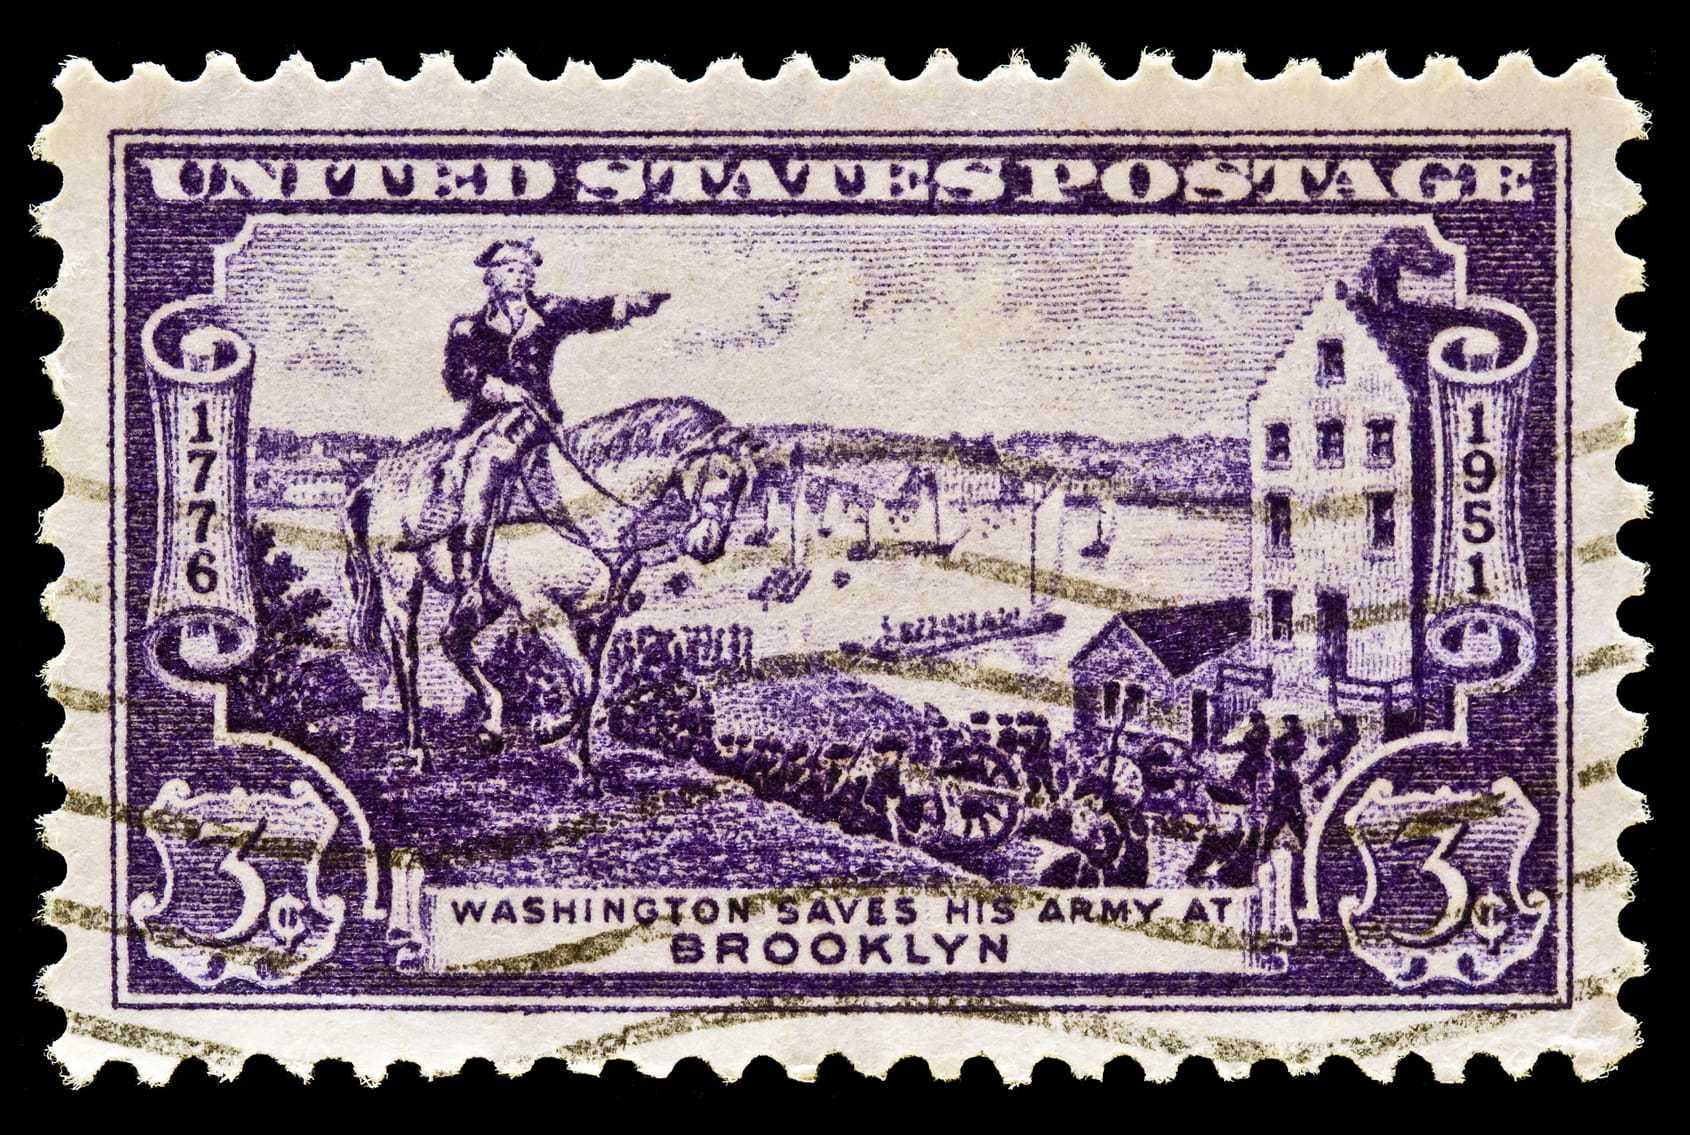 A United States Postage stamp featuring George Washington on horse leading his army.